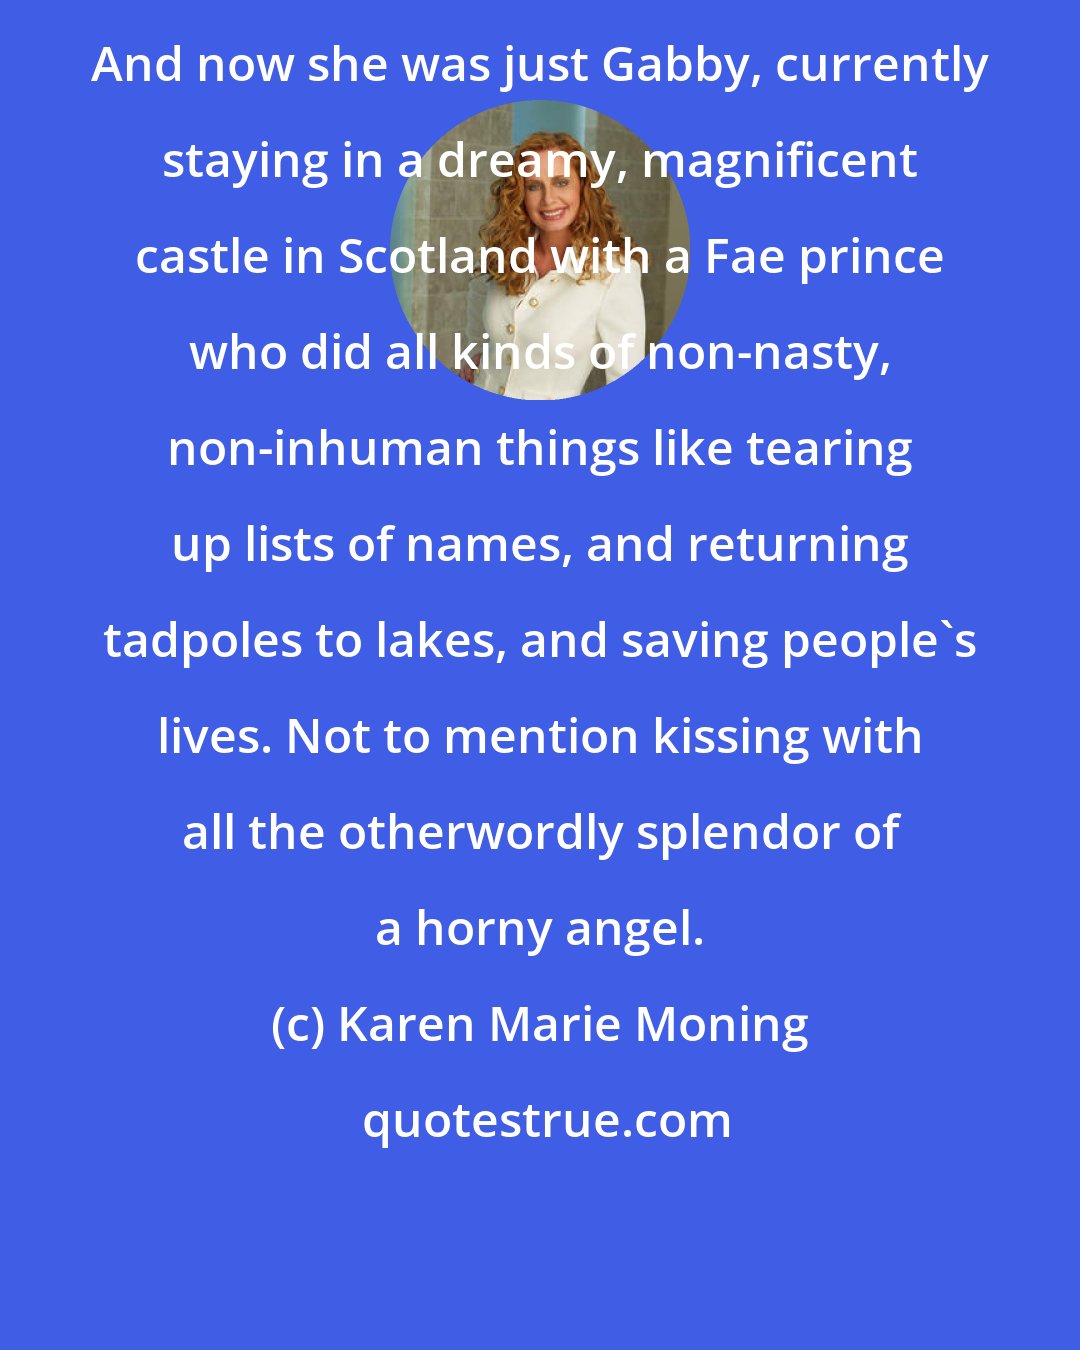 Karen Marie Moning: And now she was just Gabby, currently staying in a dreamy, magnificent castle in Scotland with a Fae prince who did all kinds of non-nasty, non-inhuman things like tearing up lists of names, and returning tadpoles to lakes, and saving people's lives. Not to mention kissing with all the otherwordly splendor of a horny angel.